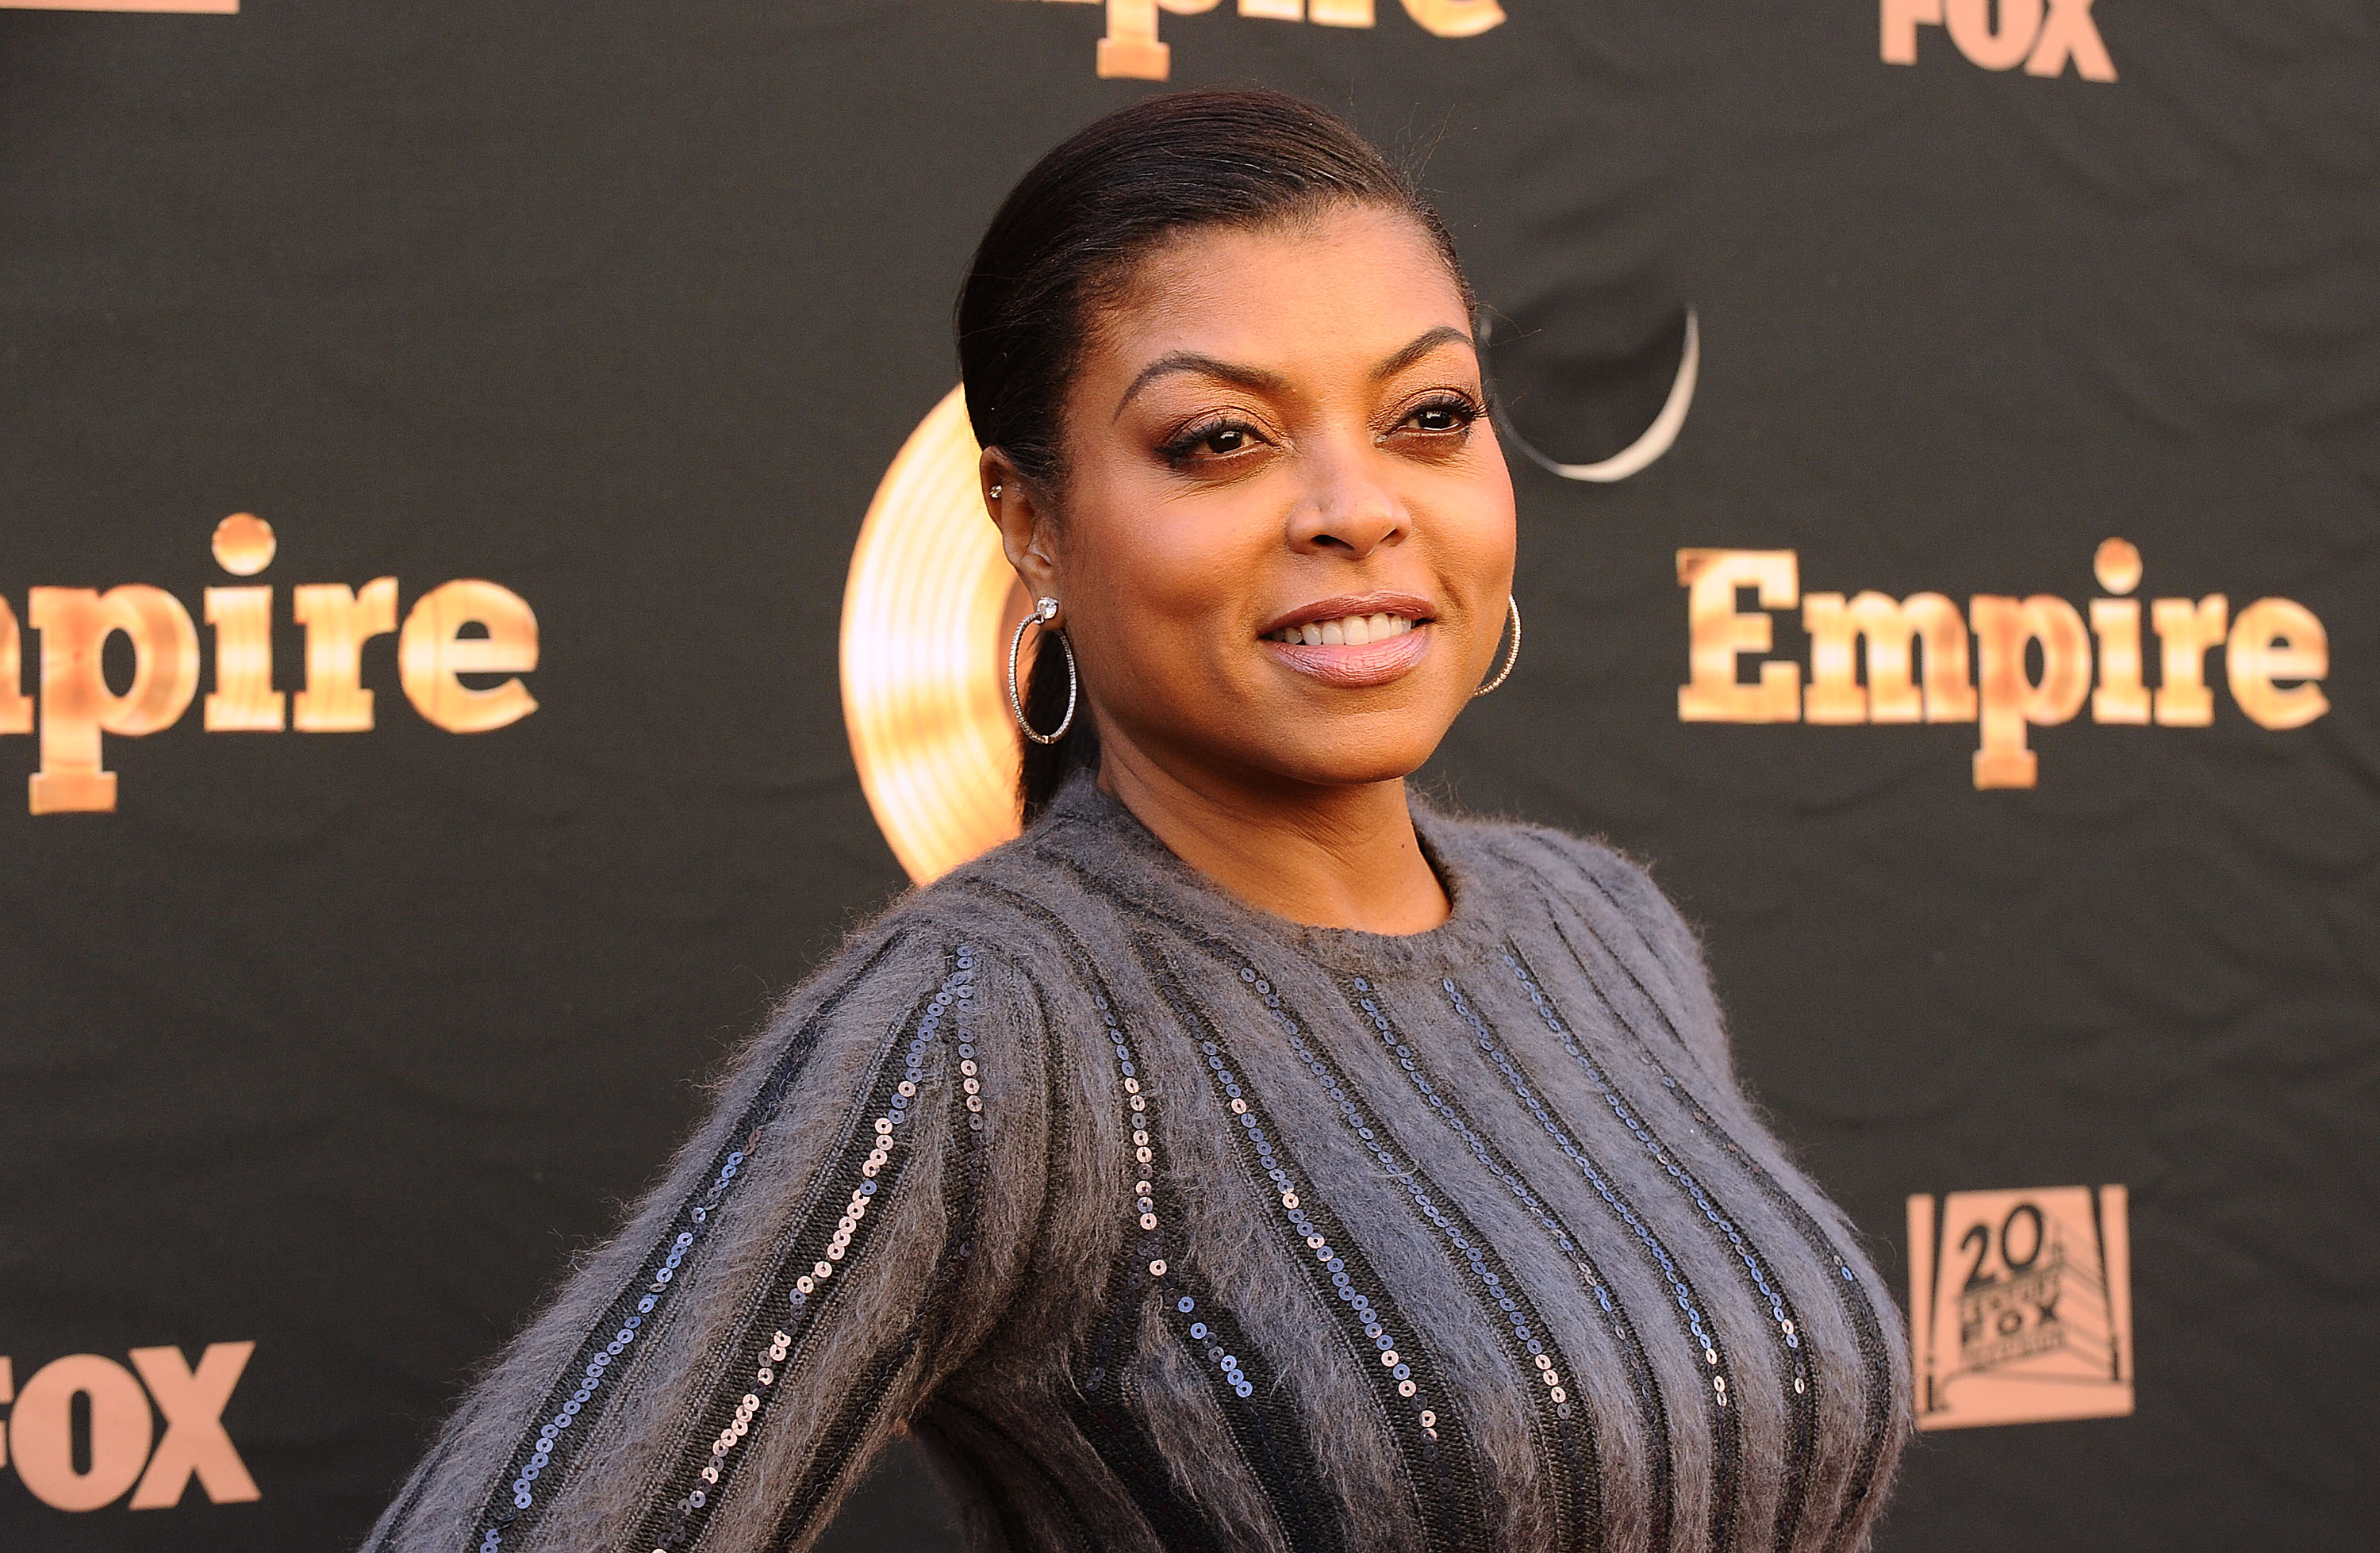 Actress Taraji P. Henson attends the "Empire" FYC ATAS event at Zanuck Theater on May 20, 2016 in Los Angeles, California. (Jason LaVeris—FilmMagic/Getty Images)